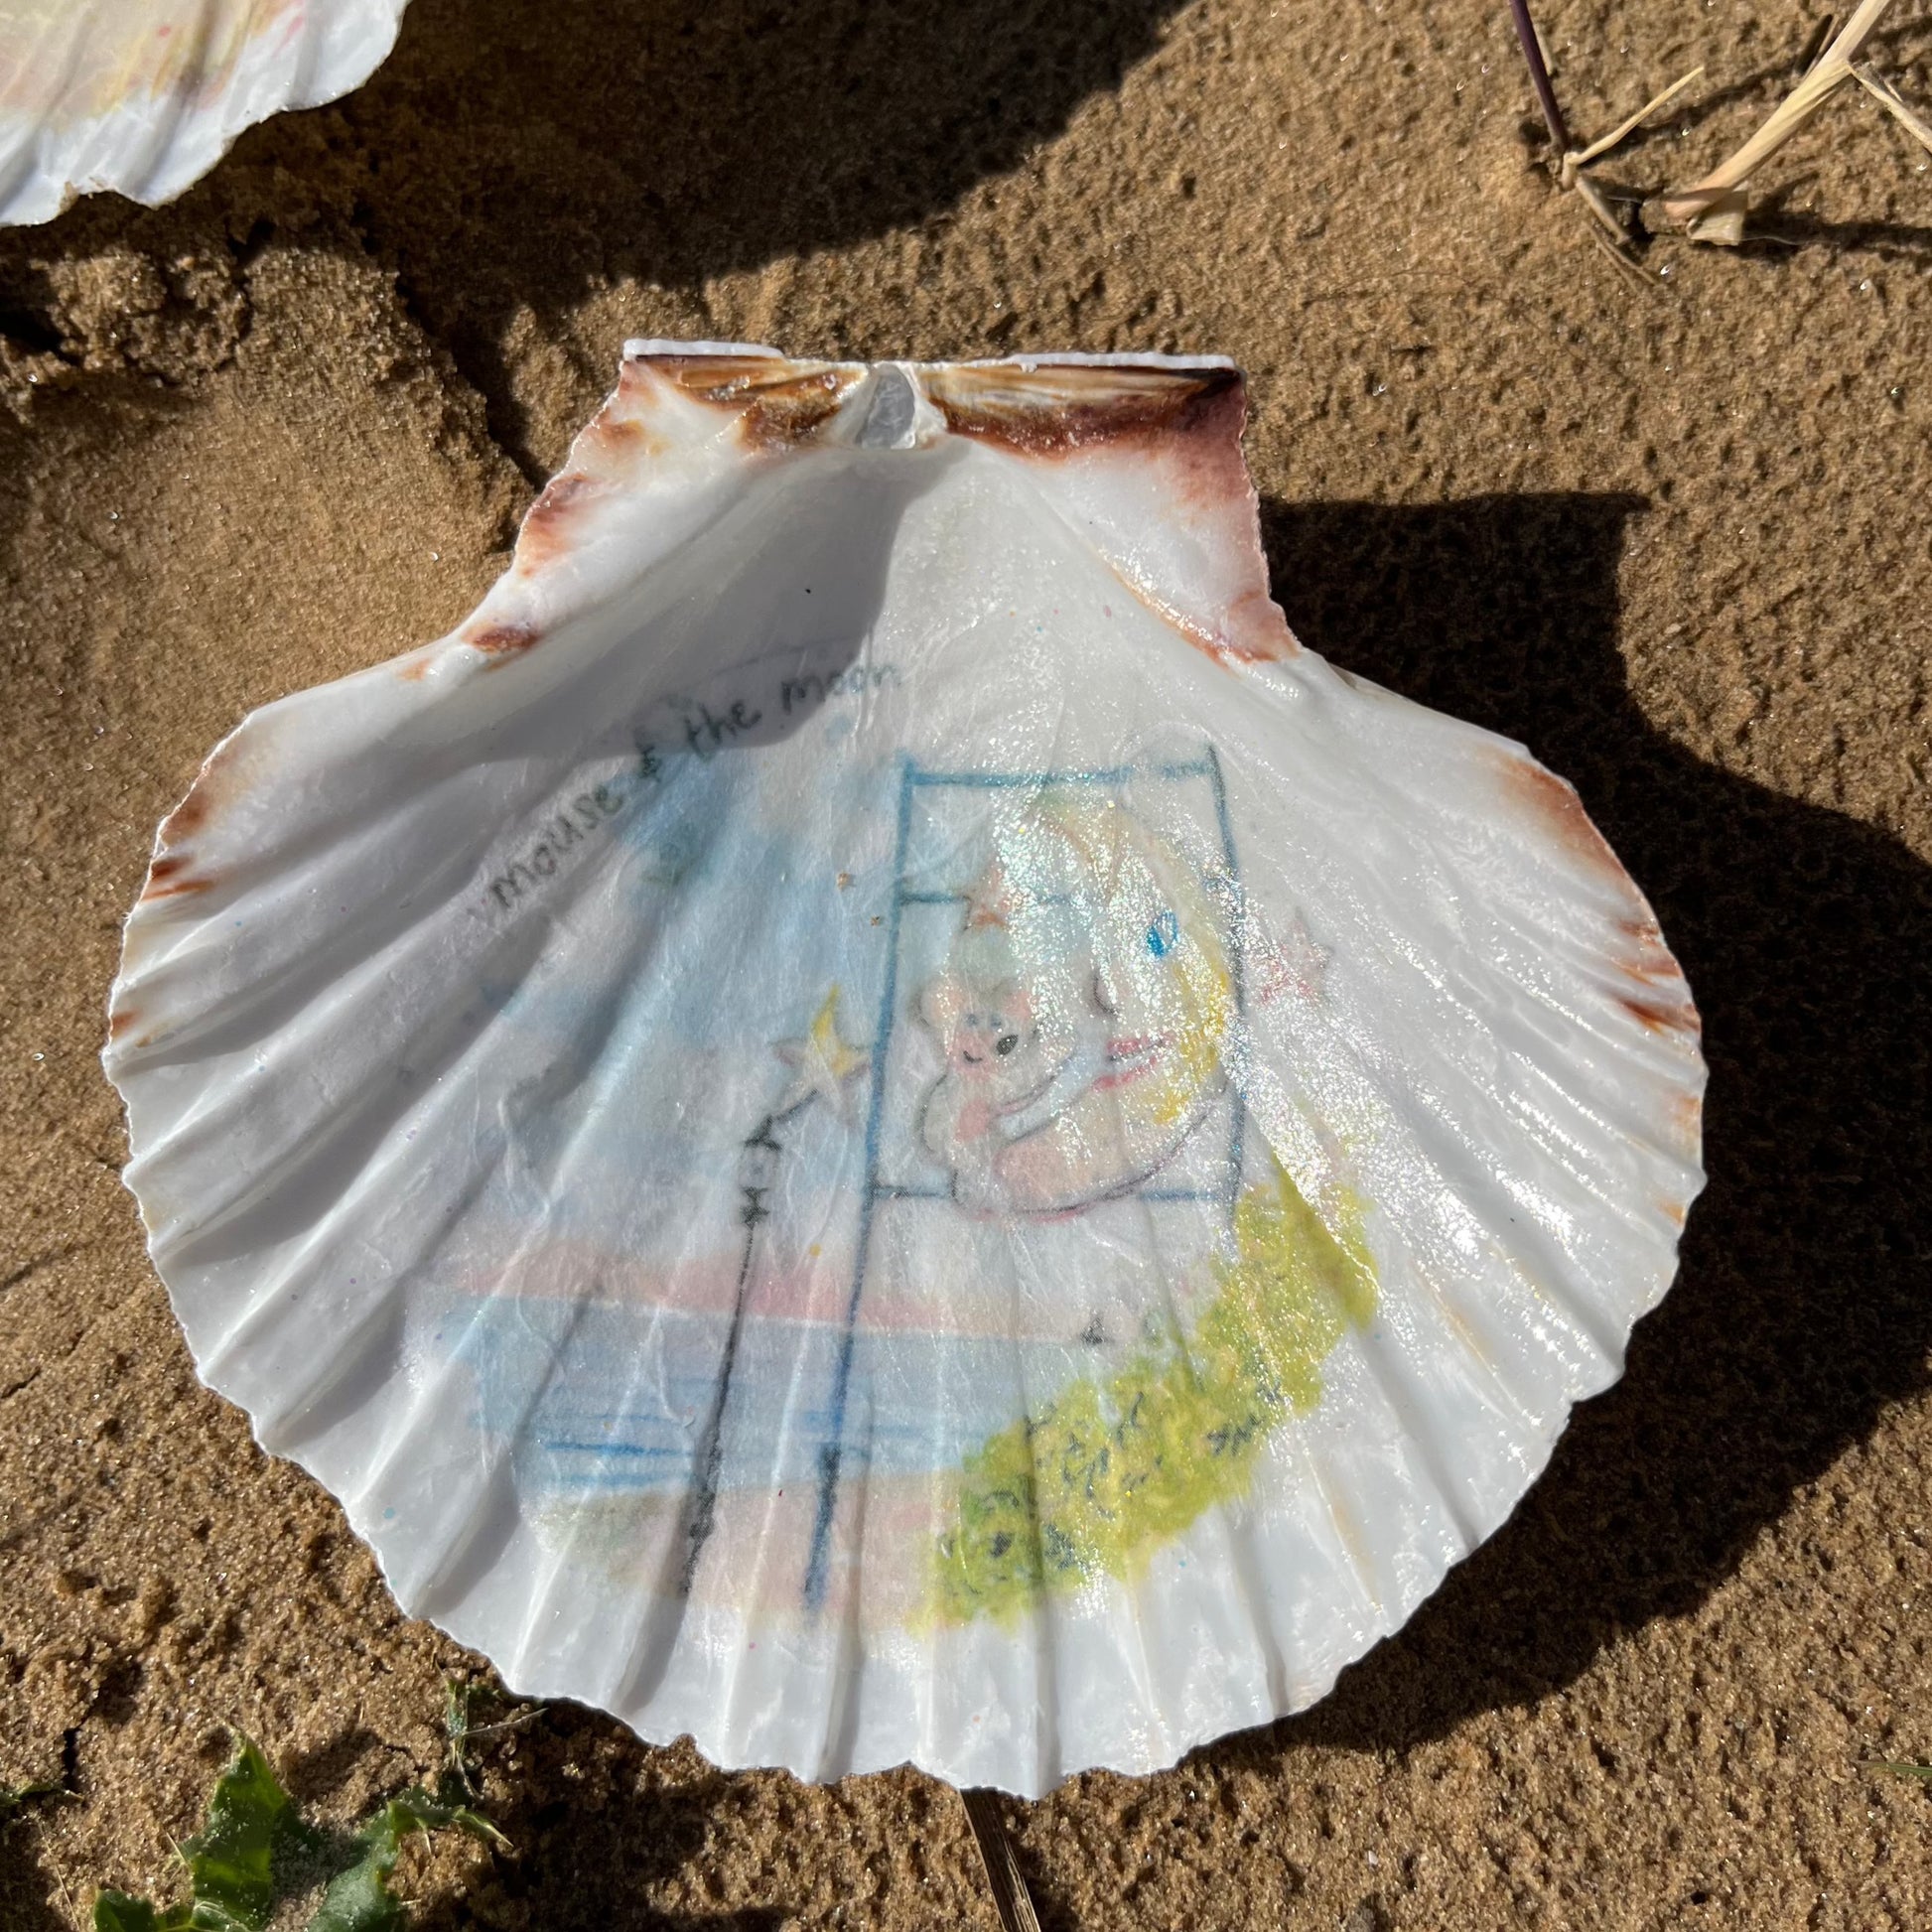 A decoupaged shell on Cleethorpes beach, featuring watercolour artwork of the Mouse and the Moon by Eve Leoni Smith and Jollypotz.